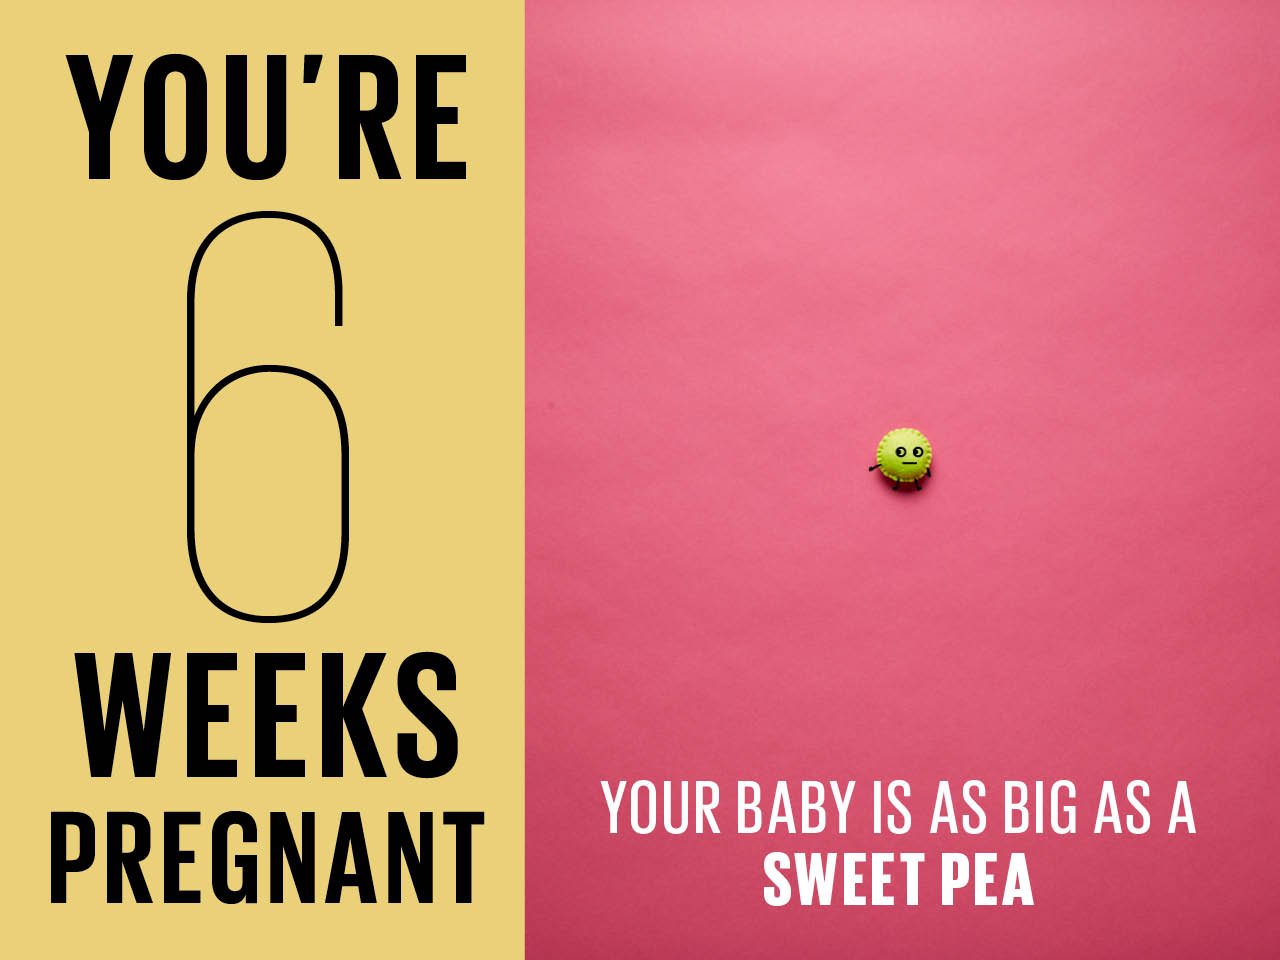 What to expect at 6 weeks pregnant